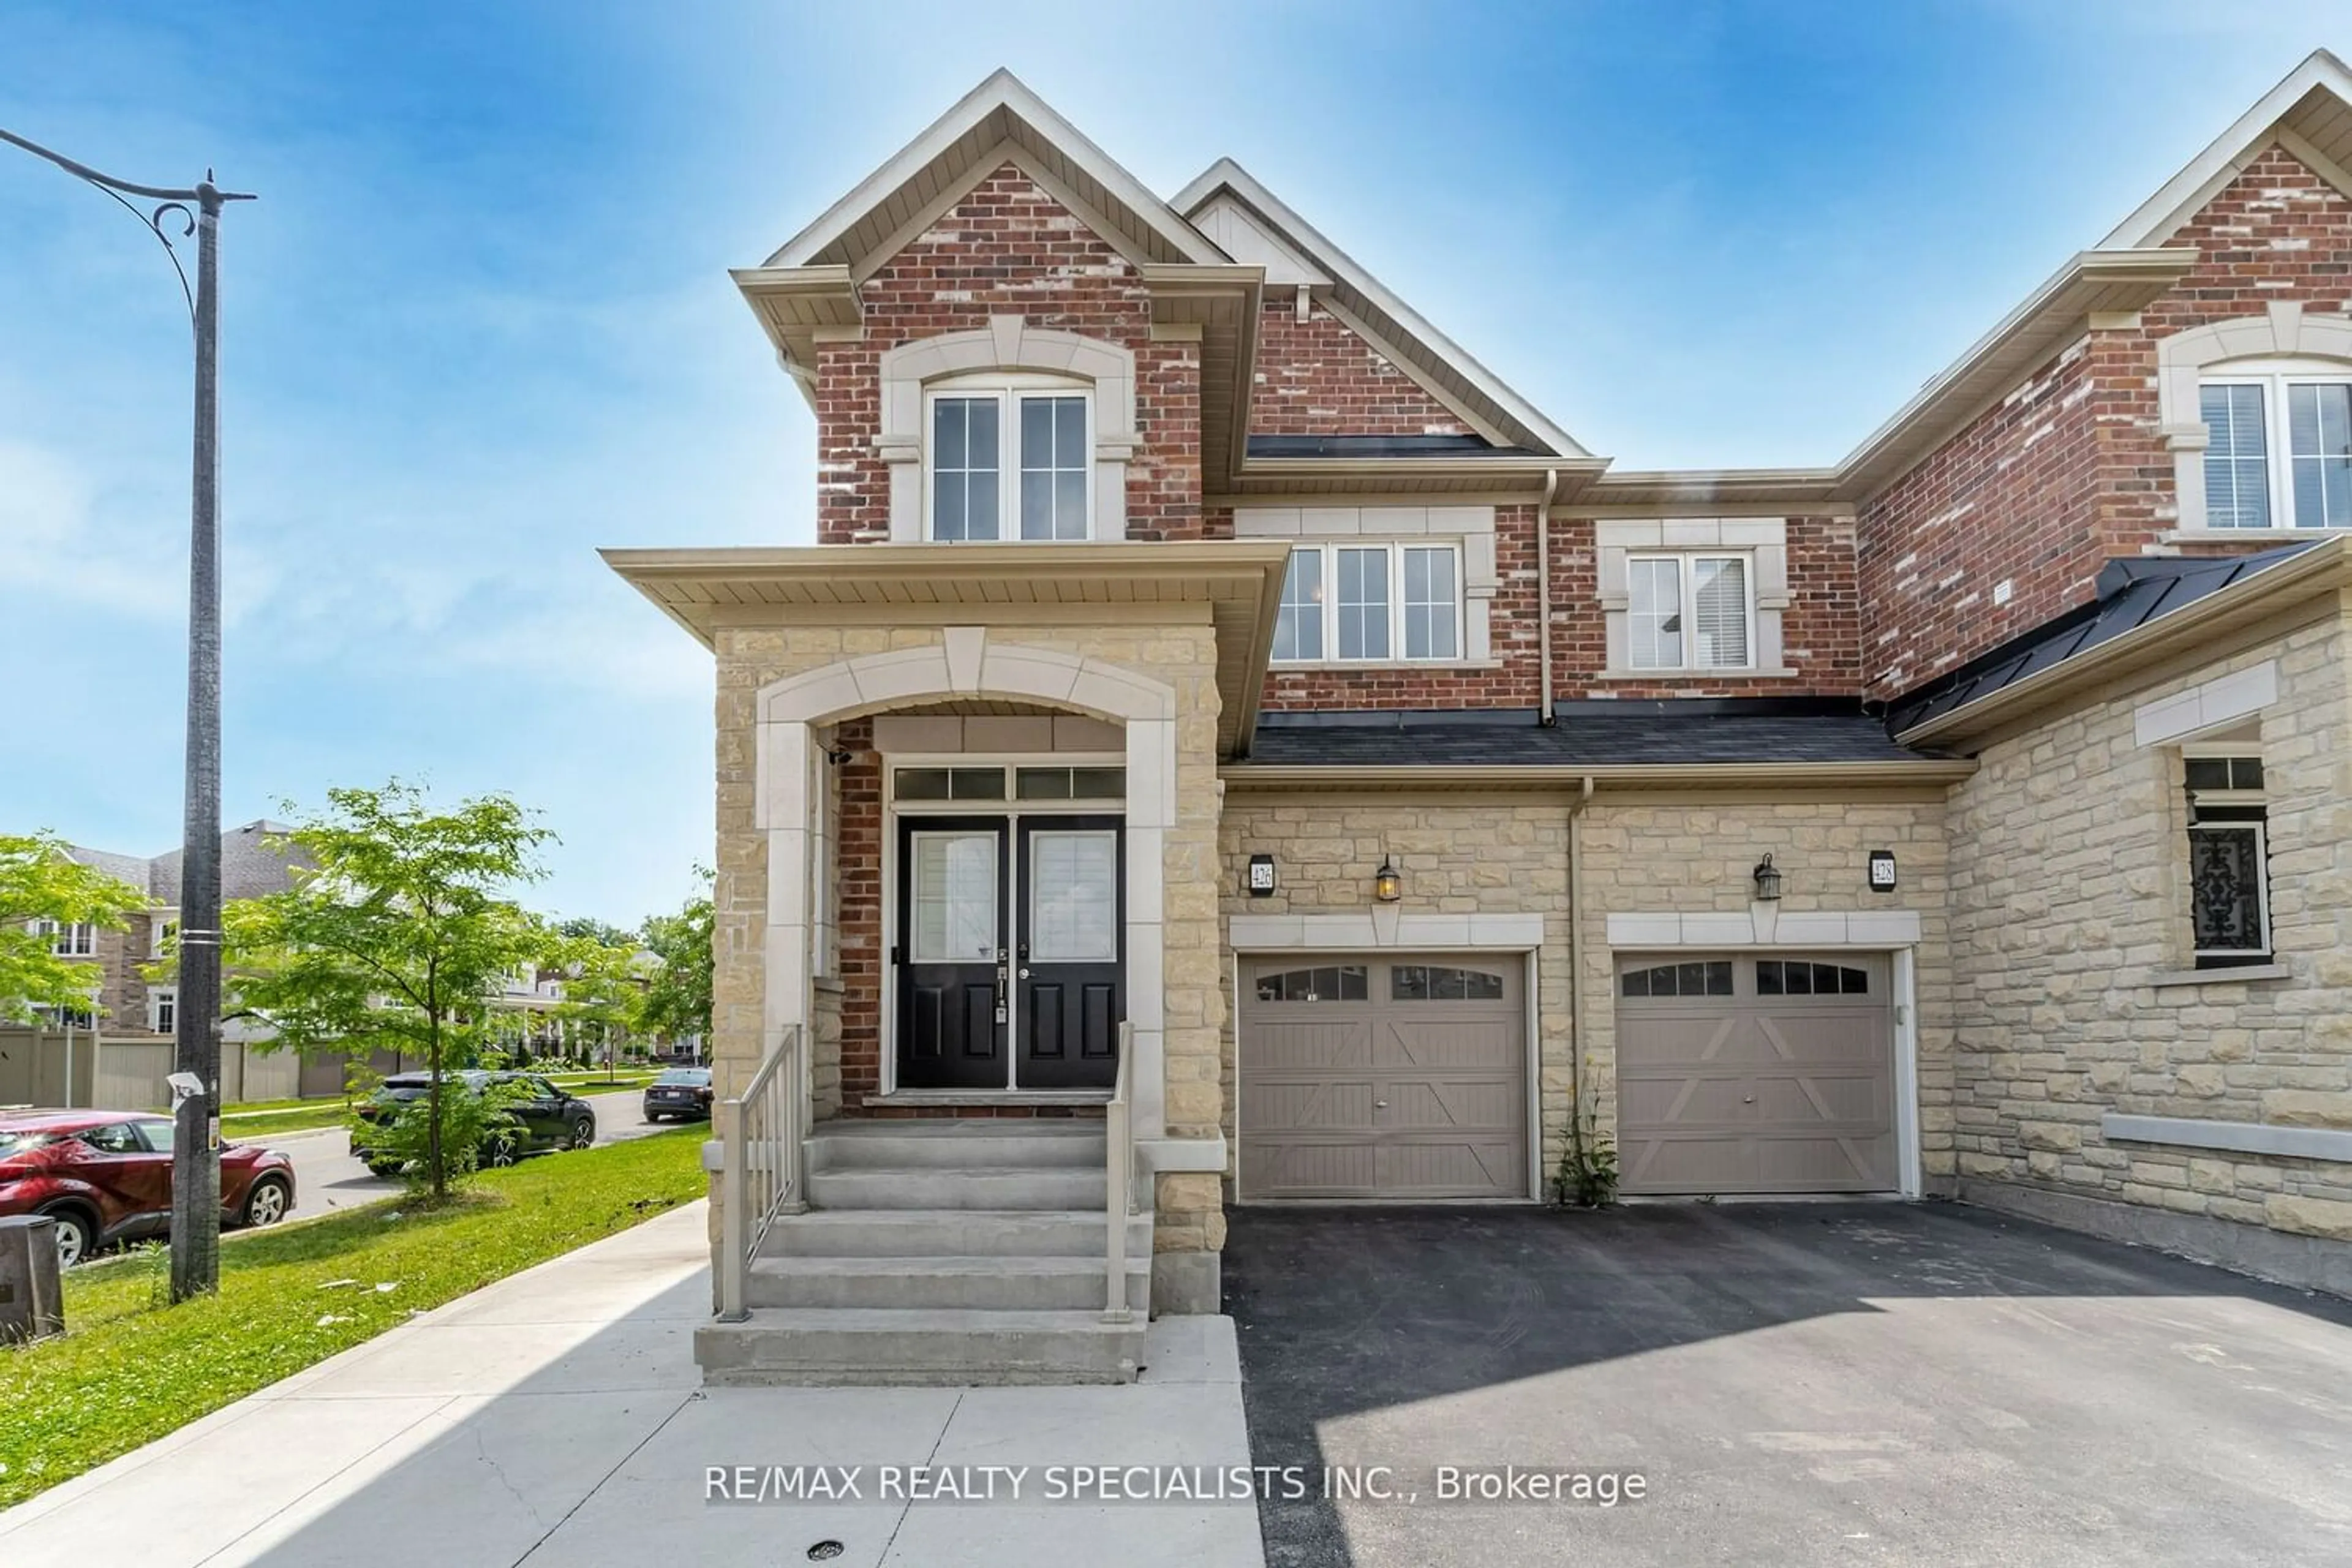 Home with brick exterior material for 426 Queen Mary Dr, Brampton Ontario L7A 4L1